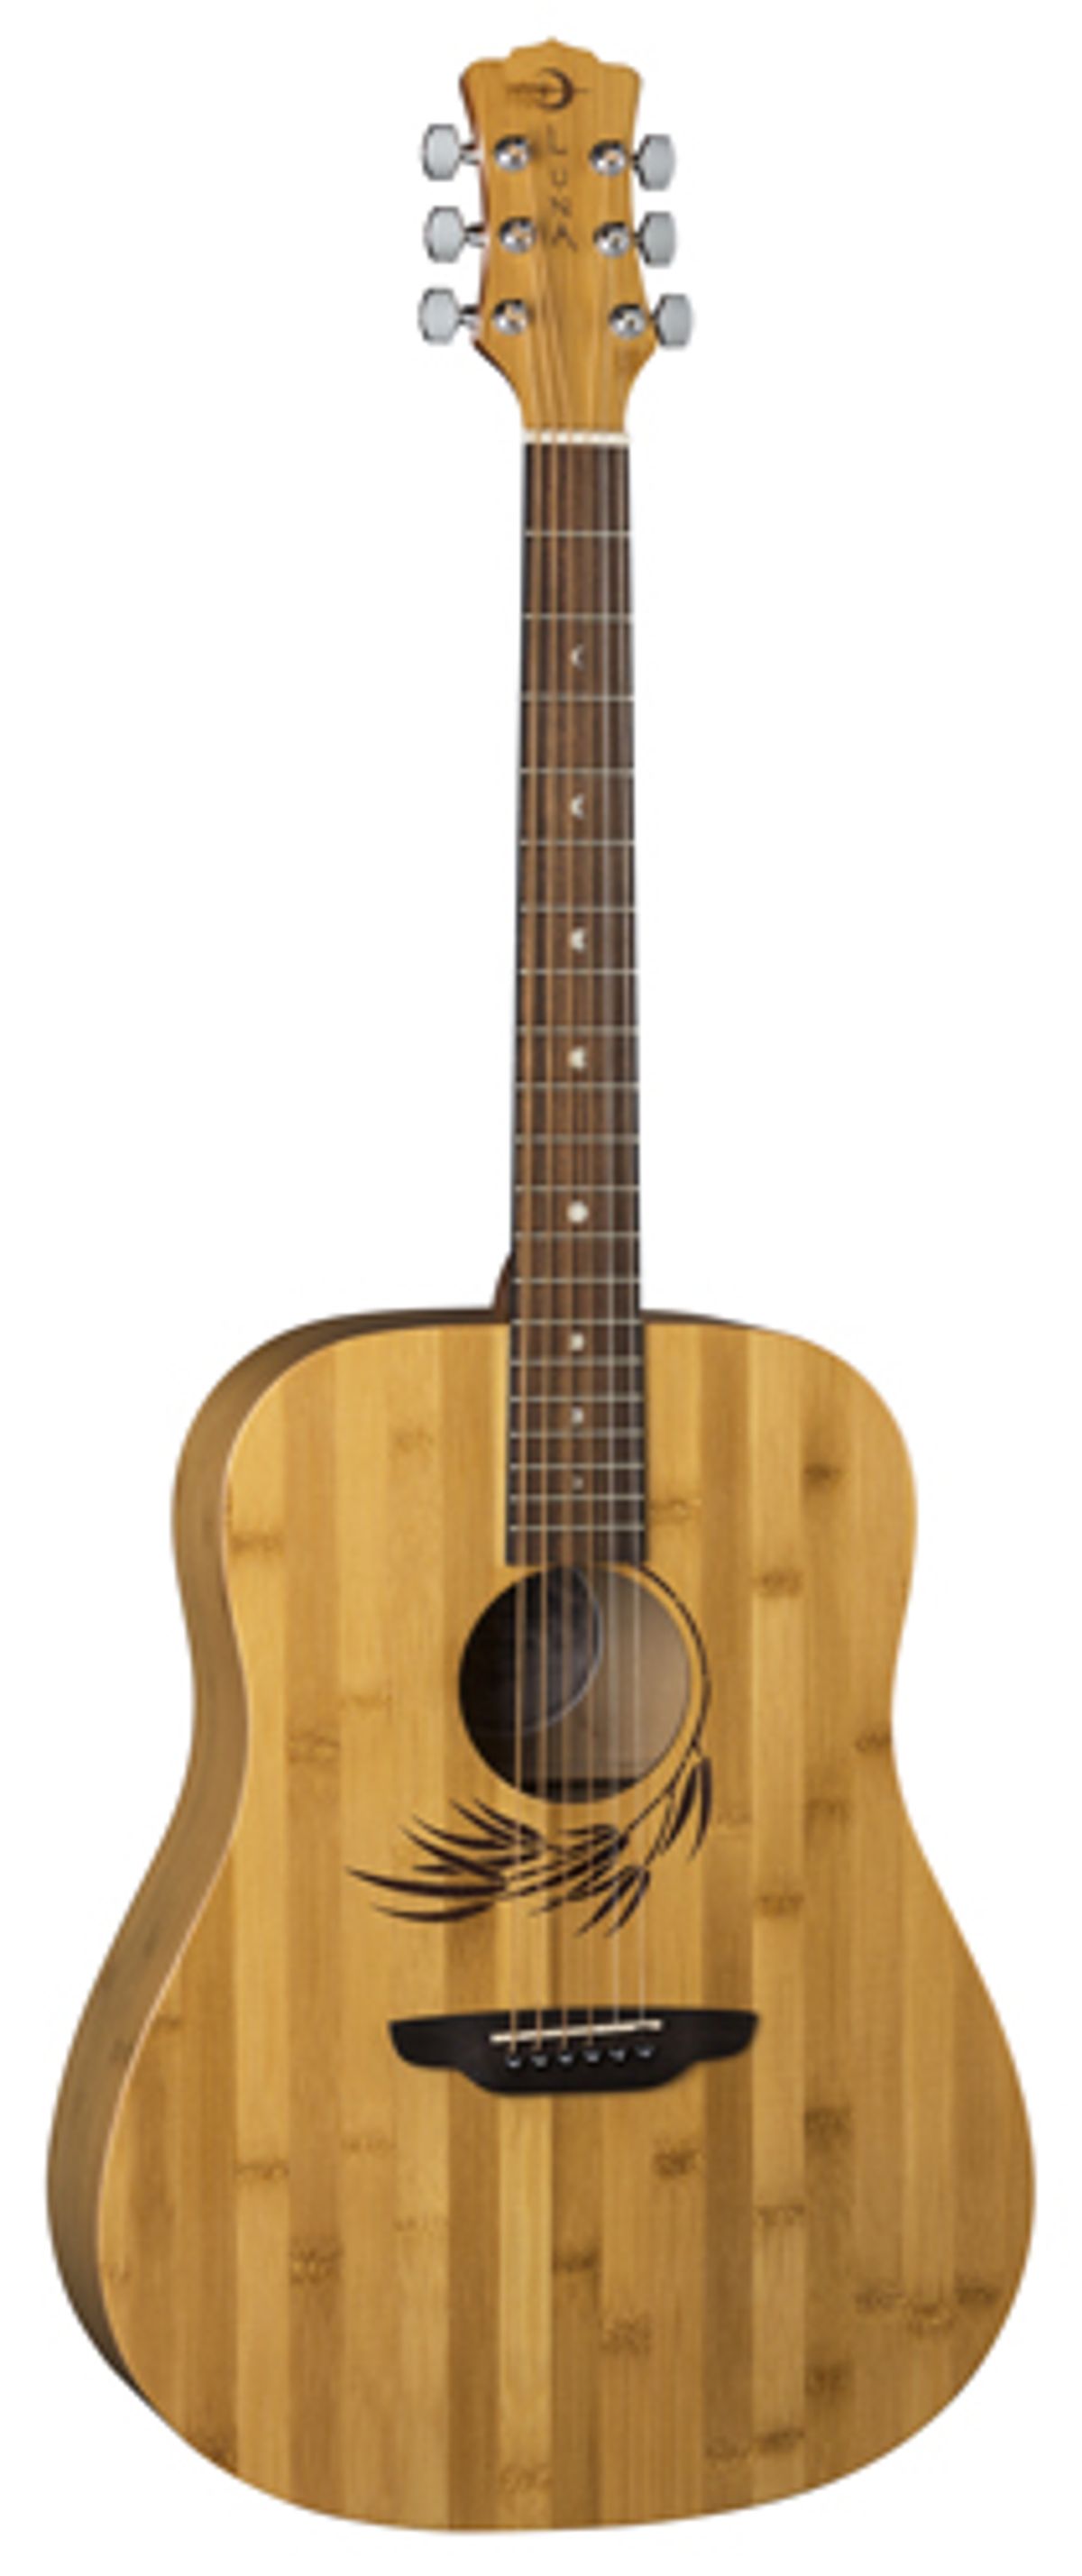 Luna Guitars Adds Woodland Bamboo Dreadnought to Acoustic Bamboo Series